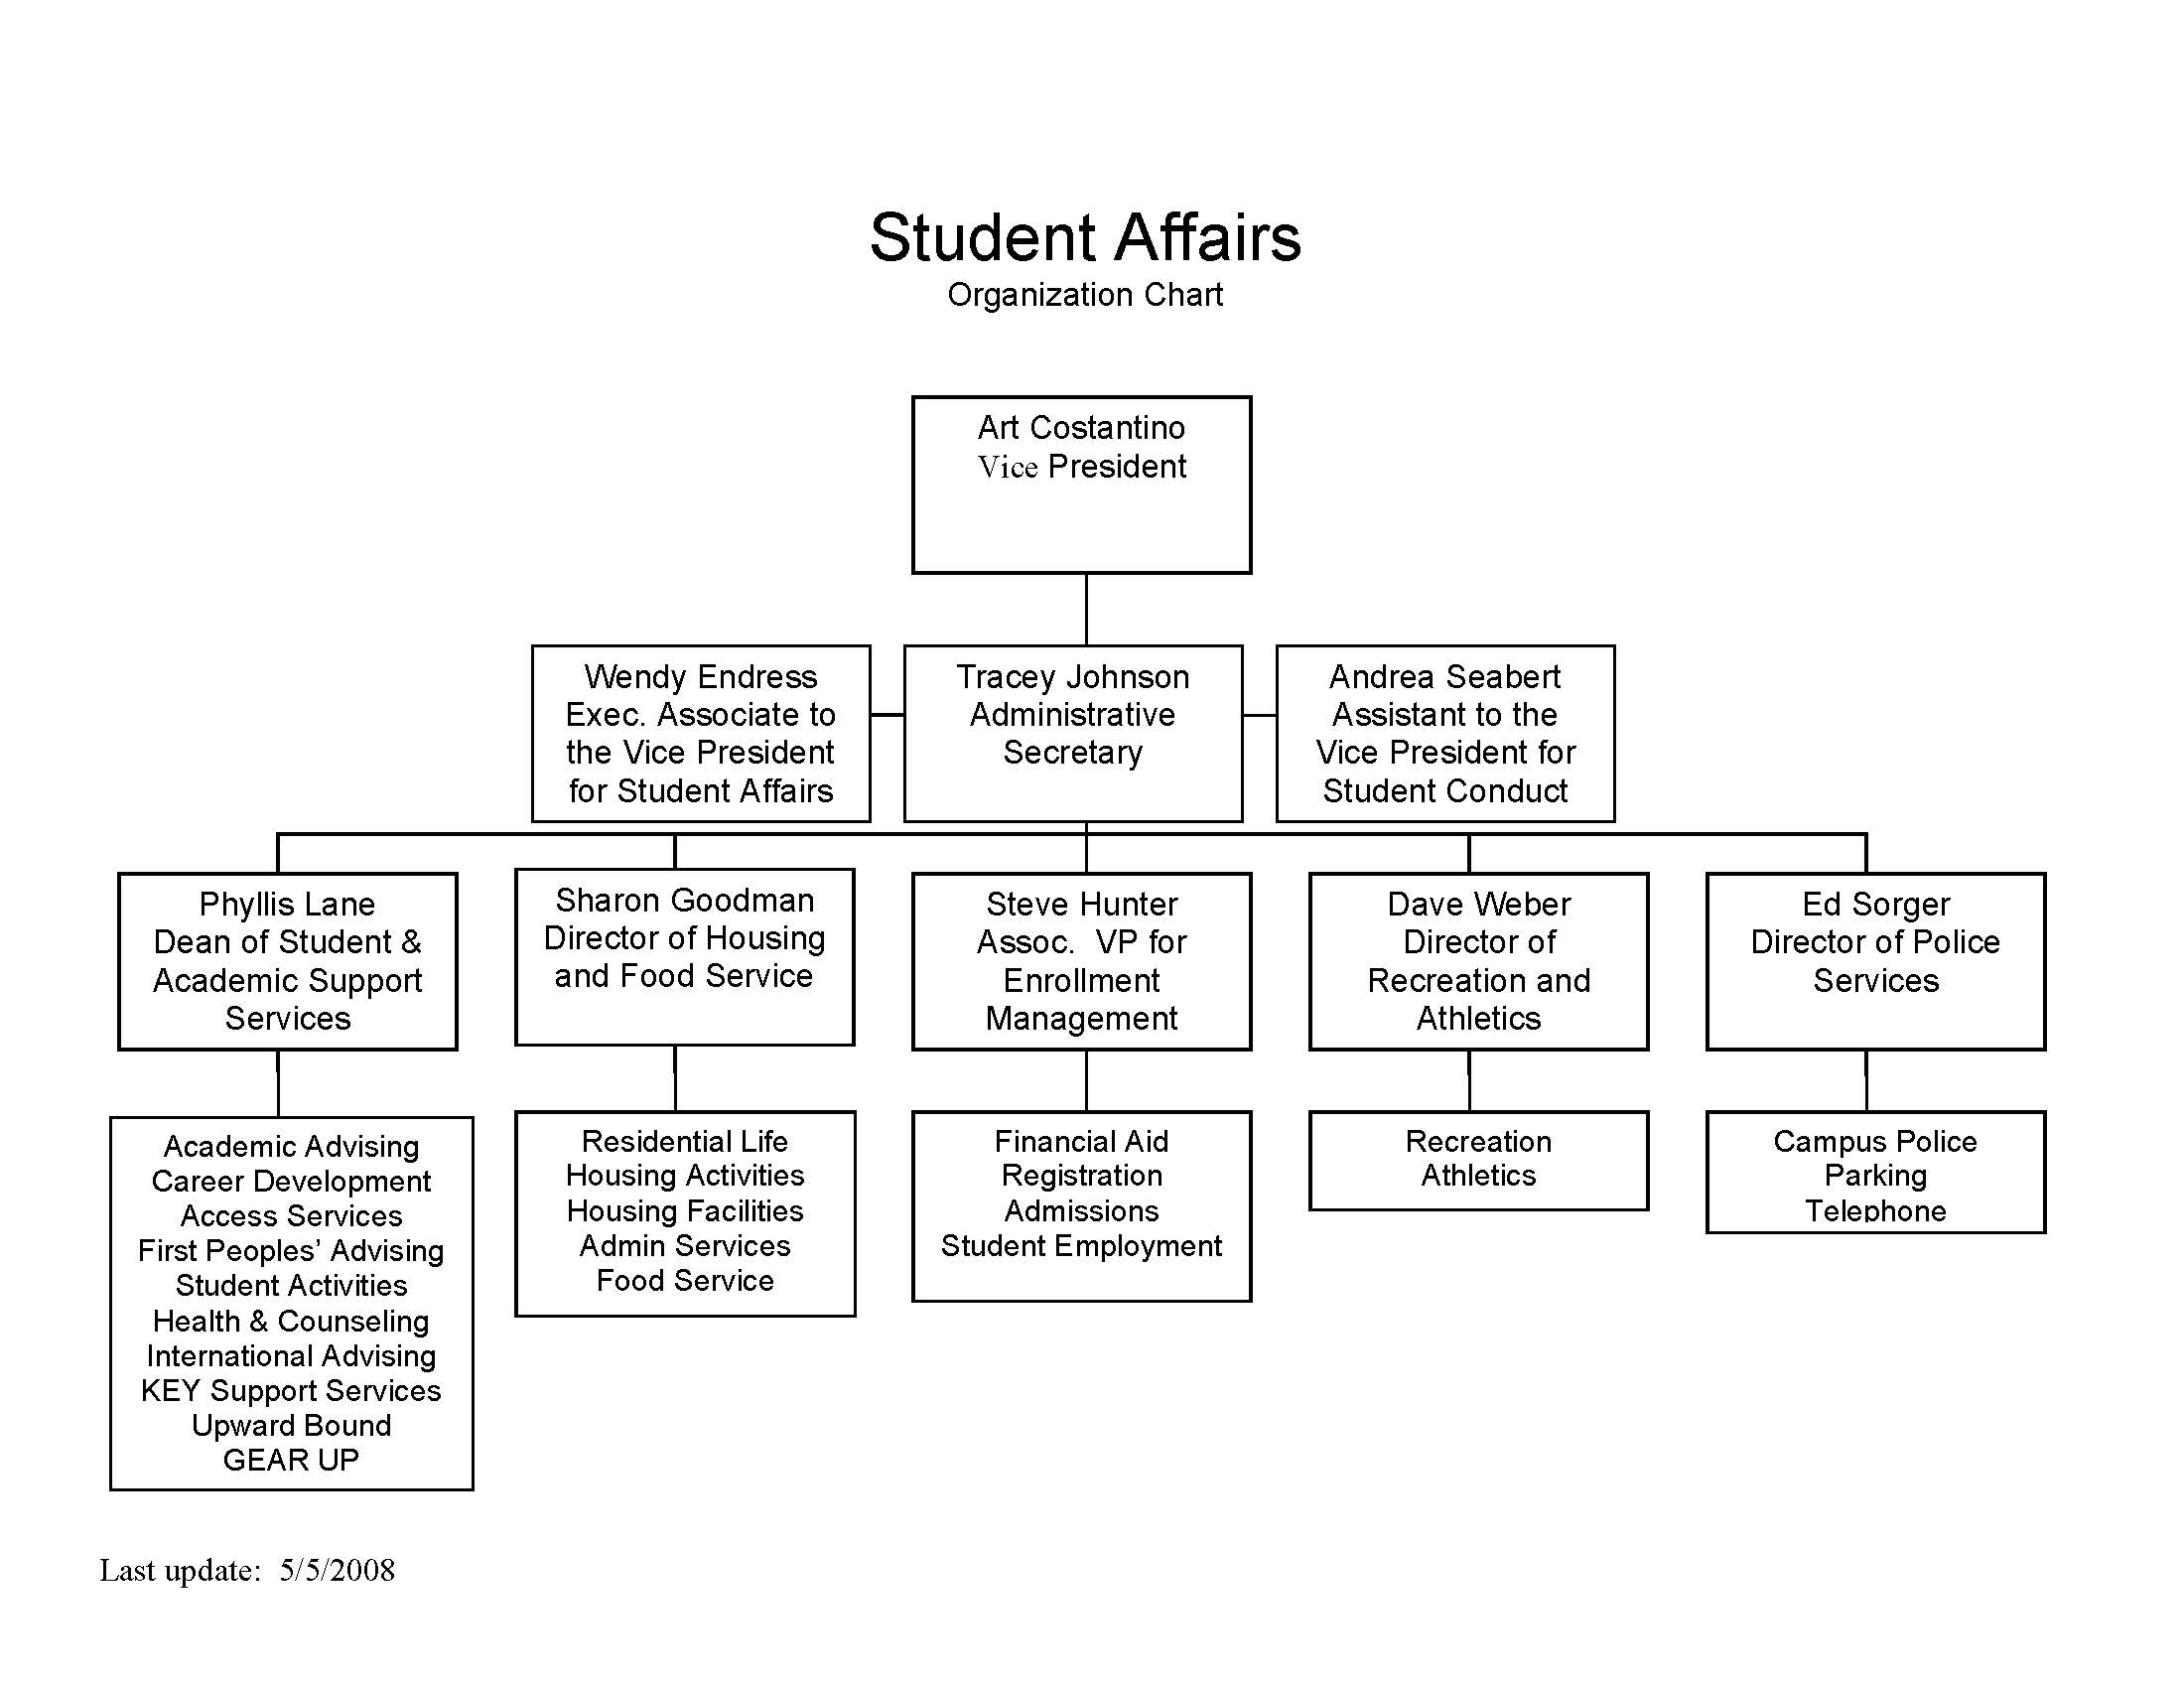 Student Affairs Organizational Chart with Names